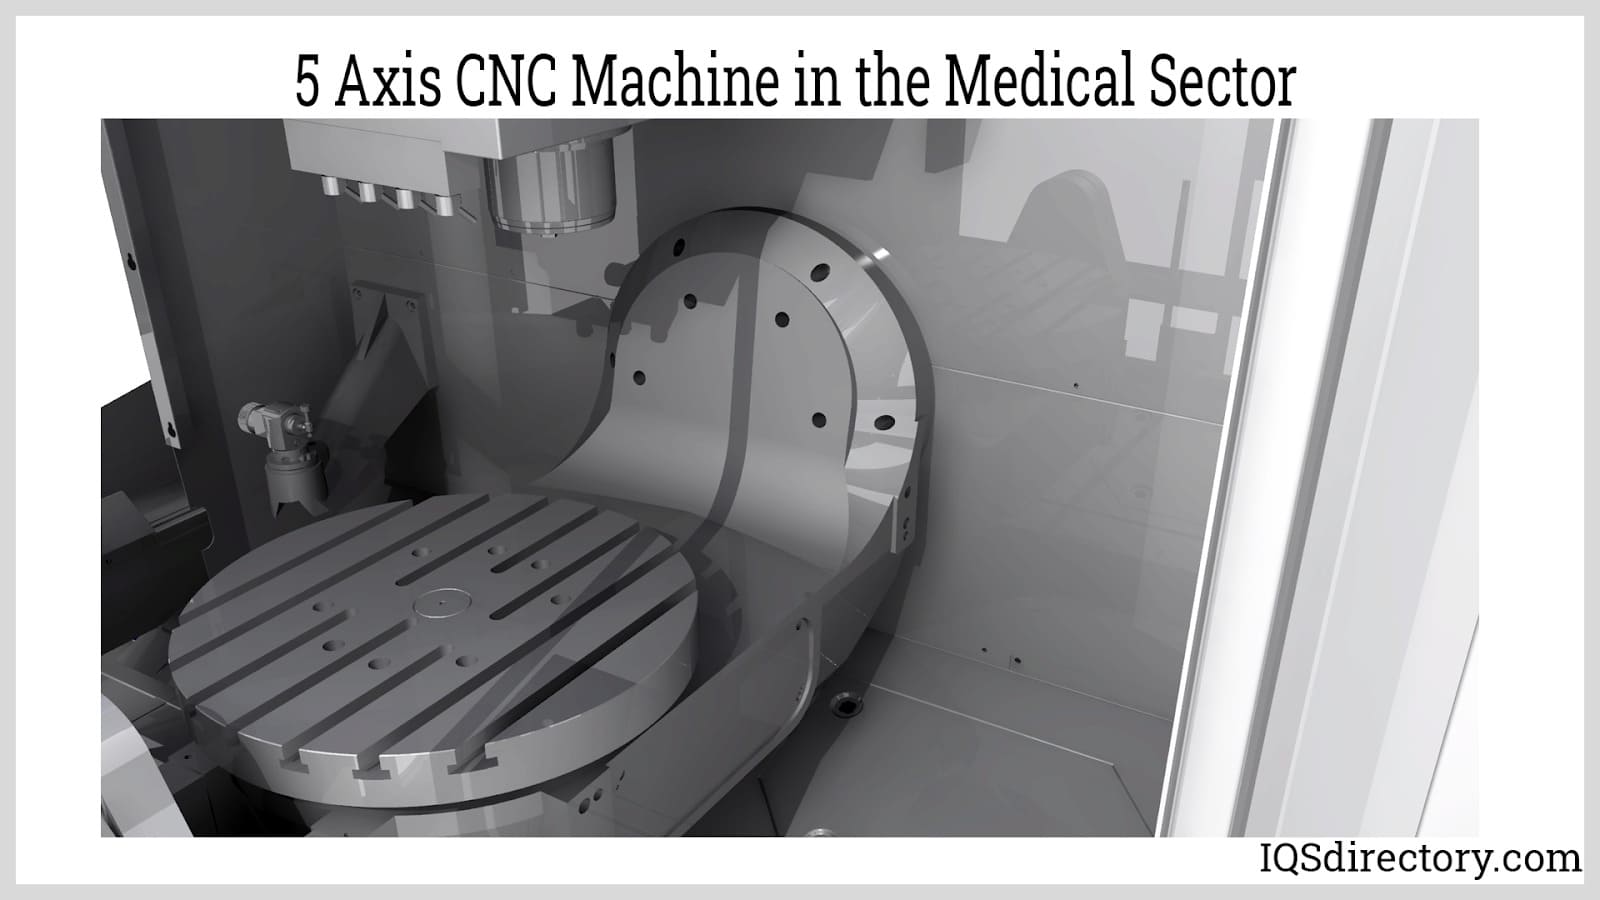 5 Axis CNC Machine in the Medical Sector